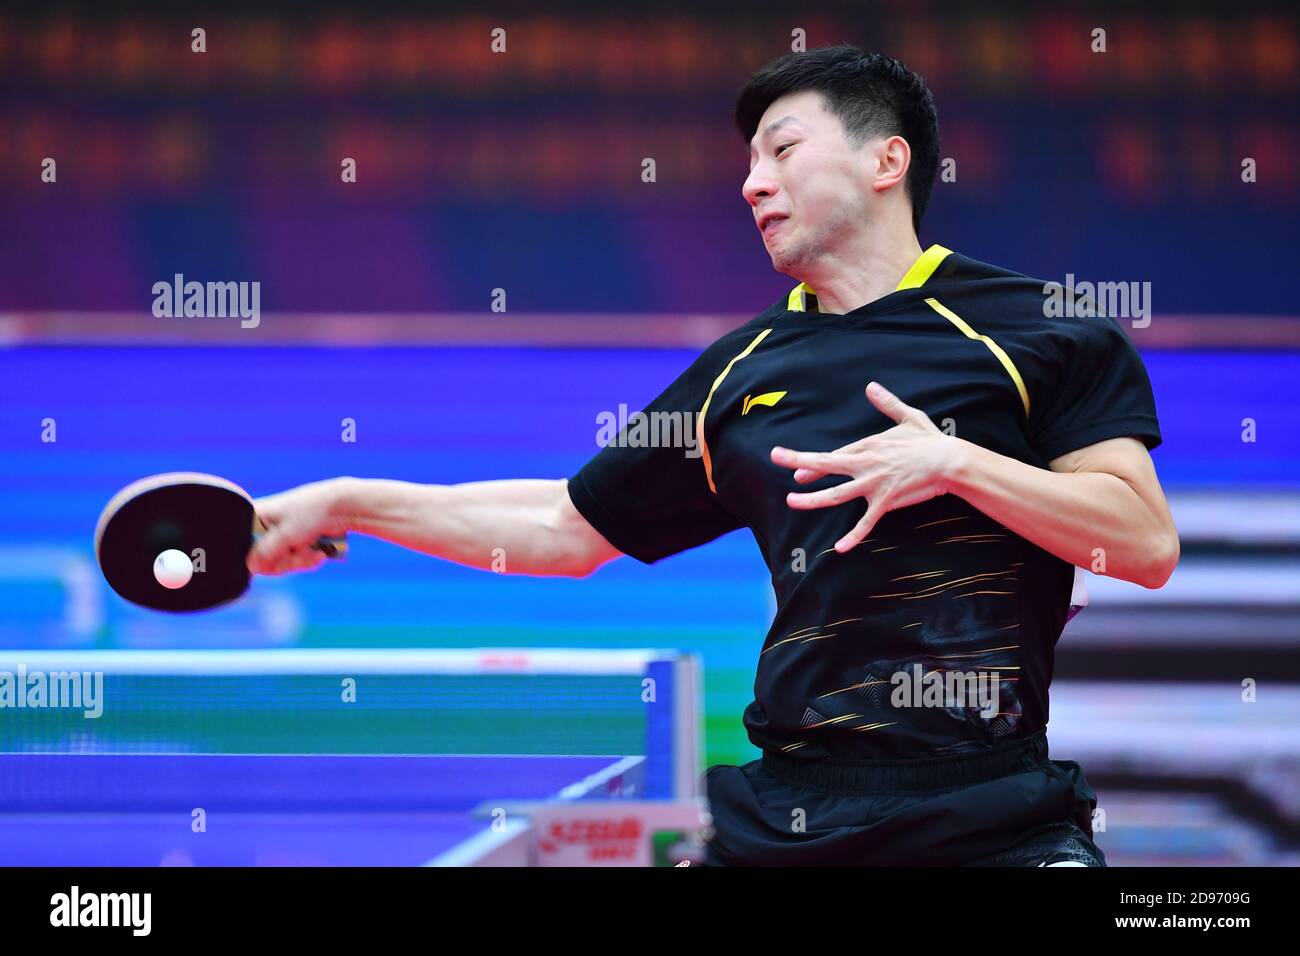 Chinese table tennis player Ma Long competes against Chinese table tennis  player Fan Zhendong at the